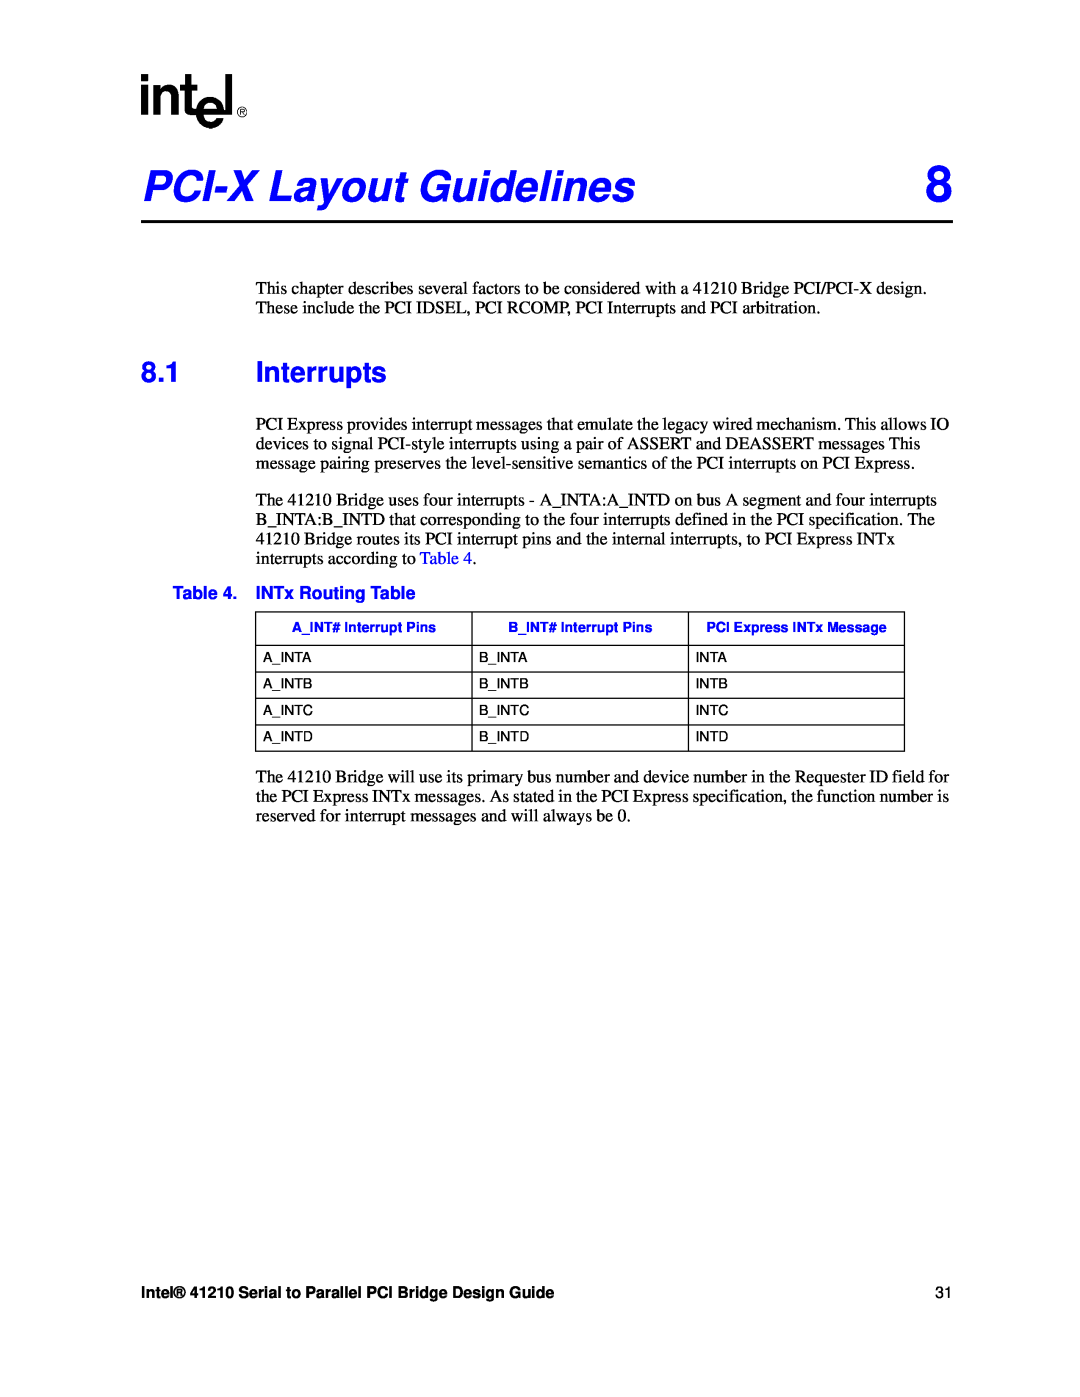 Intel 41210 manual PCI-X Layout Guidelines, Interrupts, INTx Routing Table 